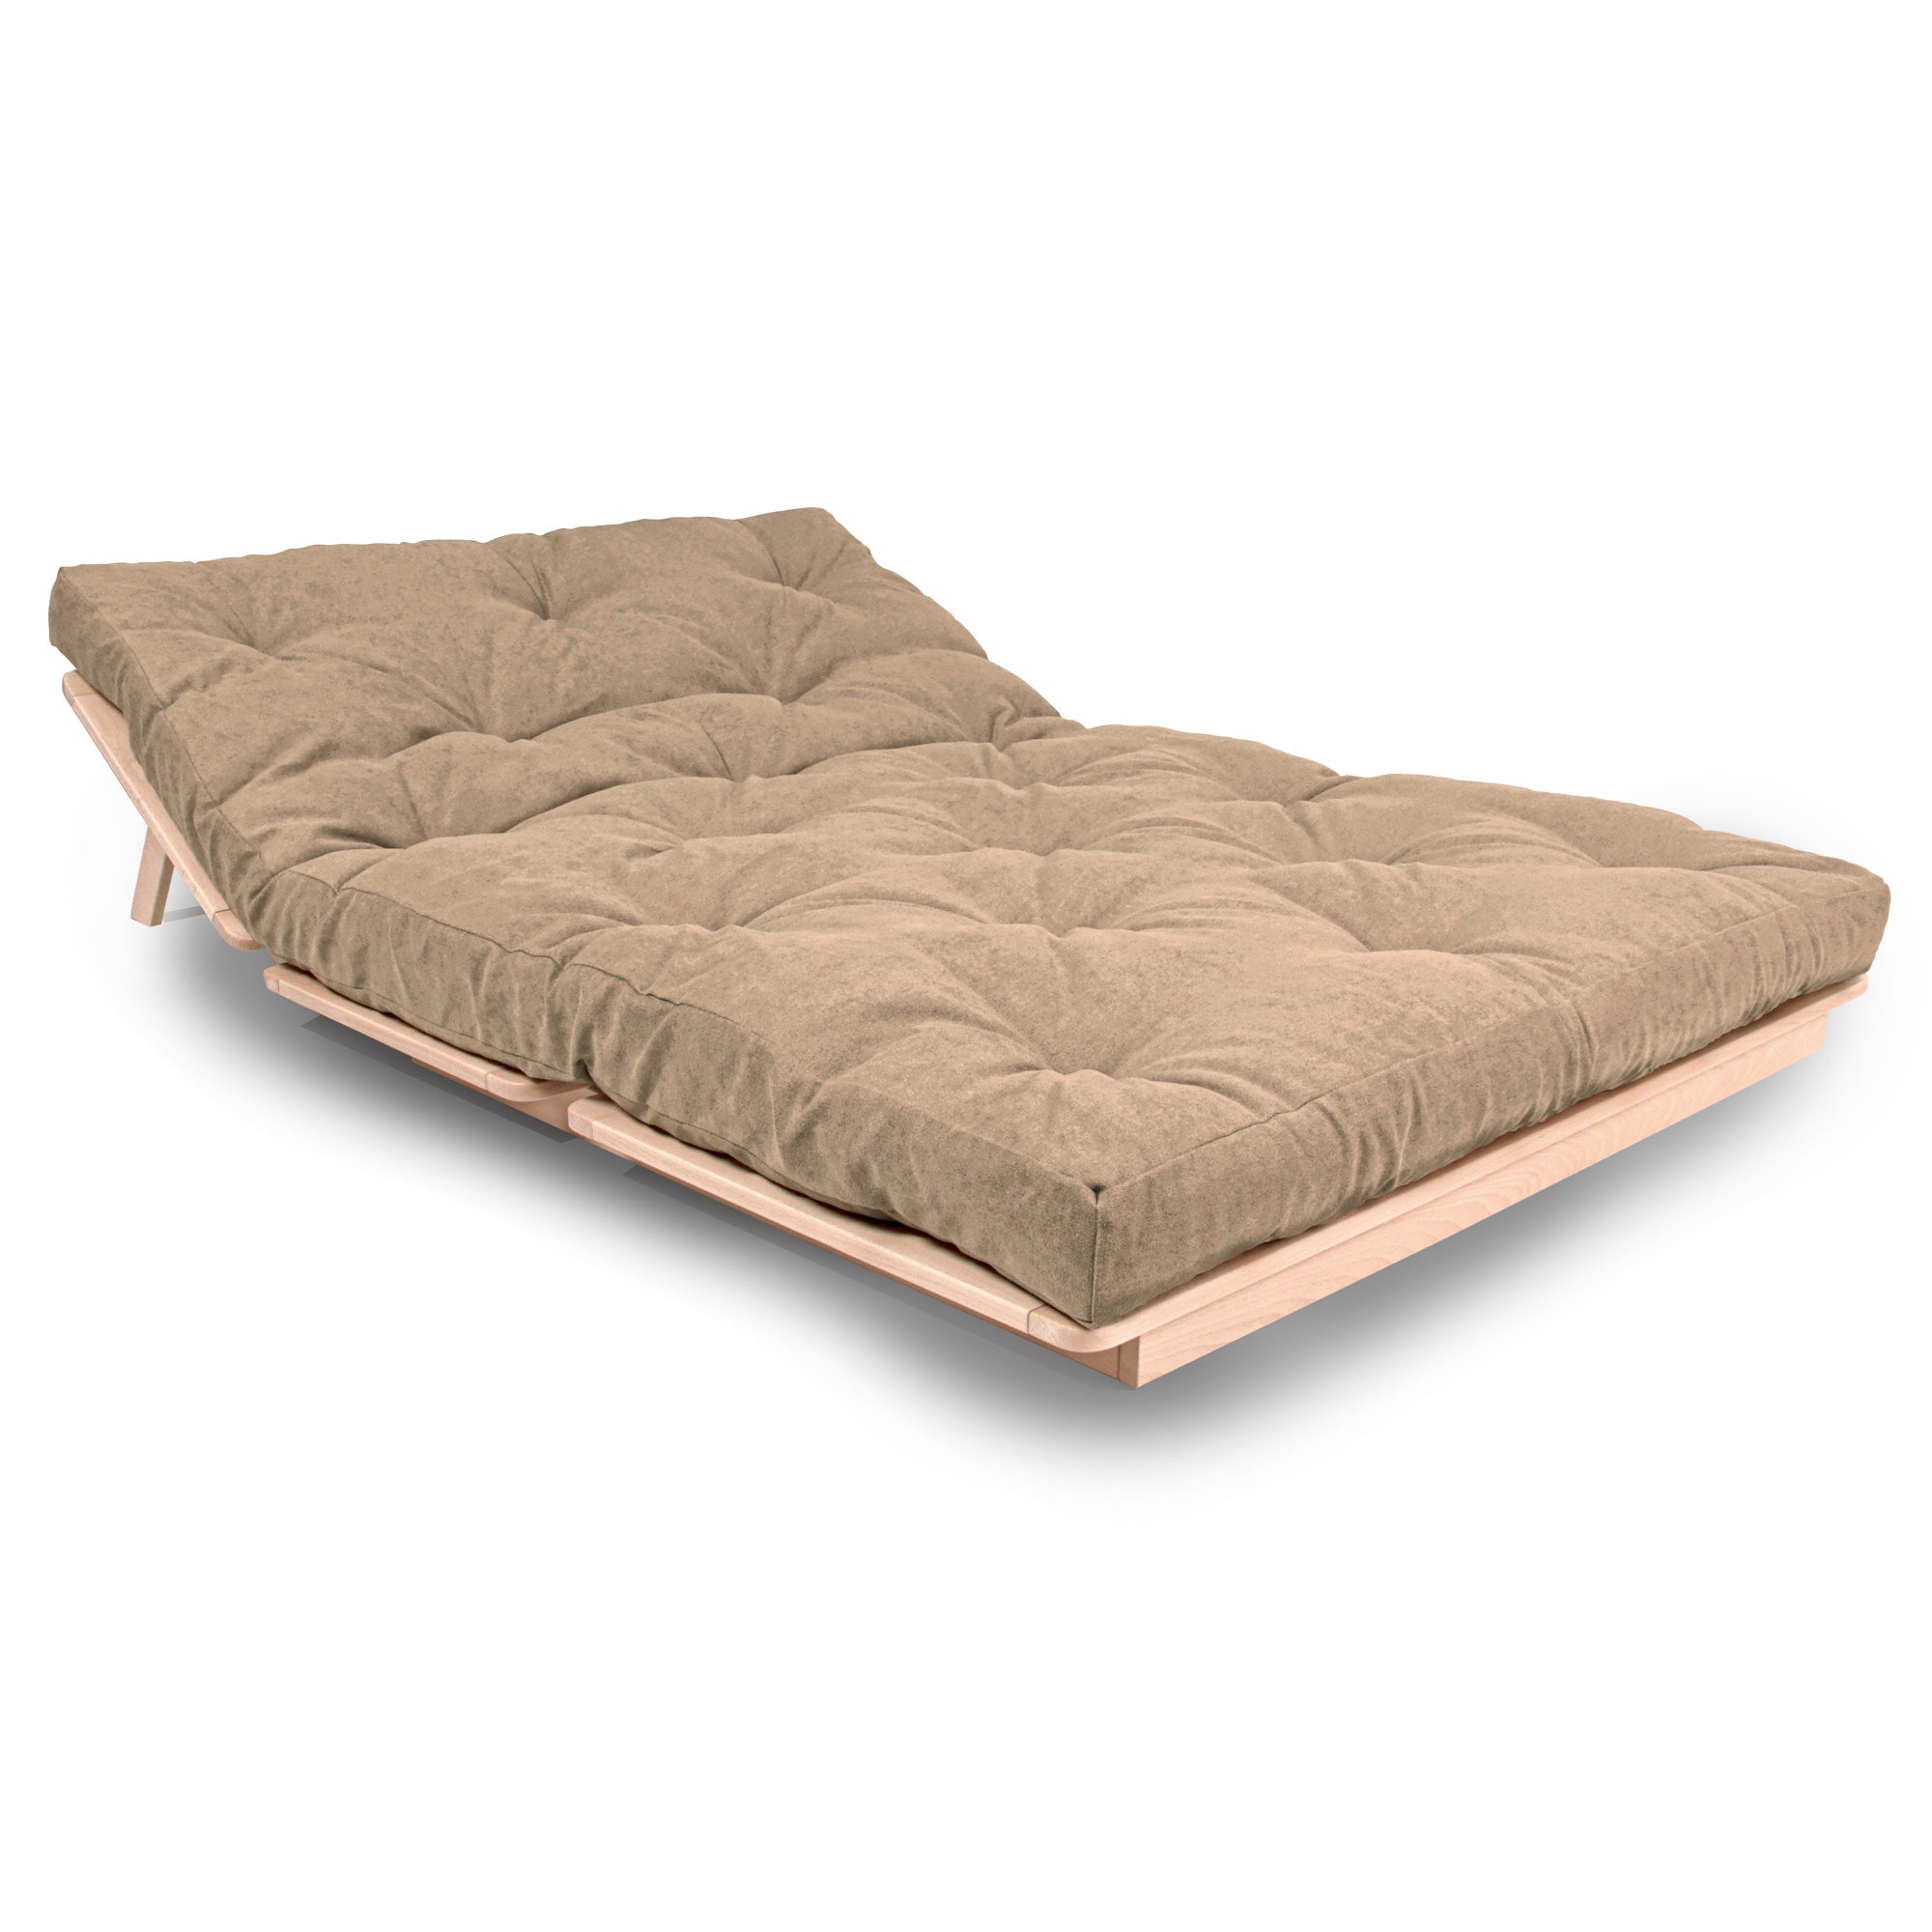 LAYTI-140 Double Futon Sofa Bed, Solid Beech Wood, Natural